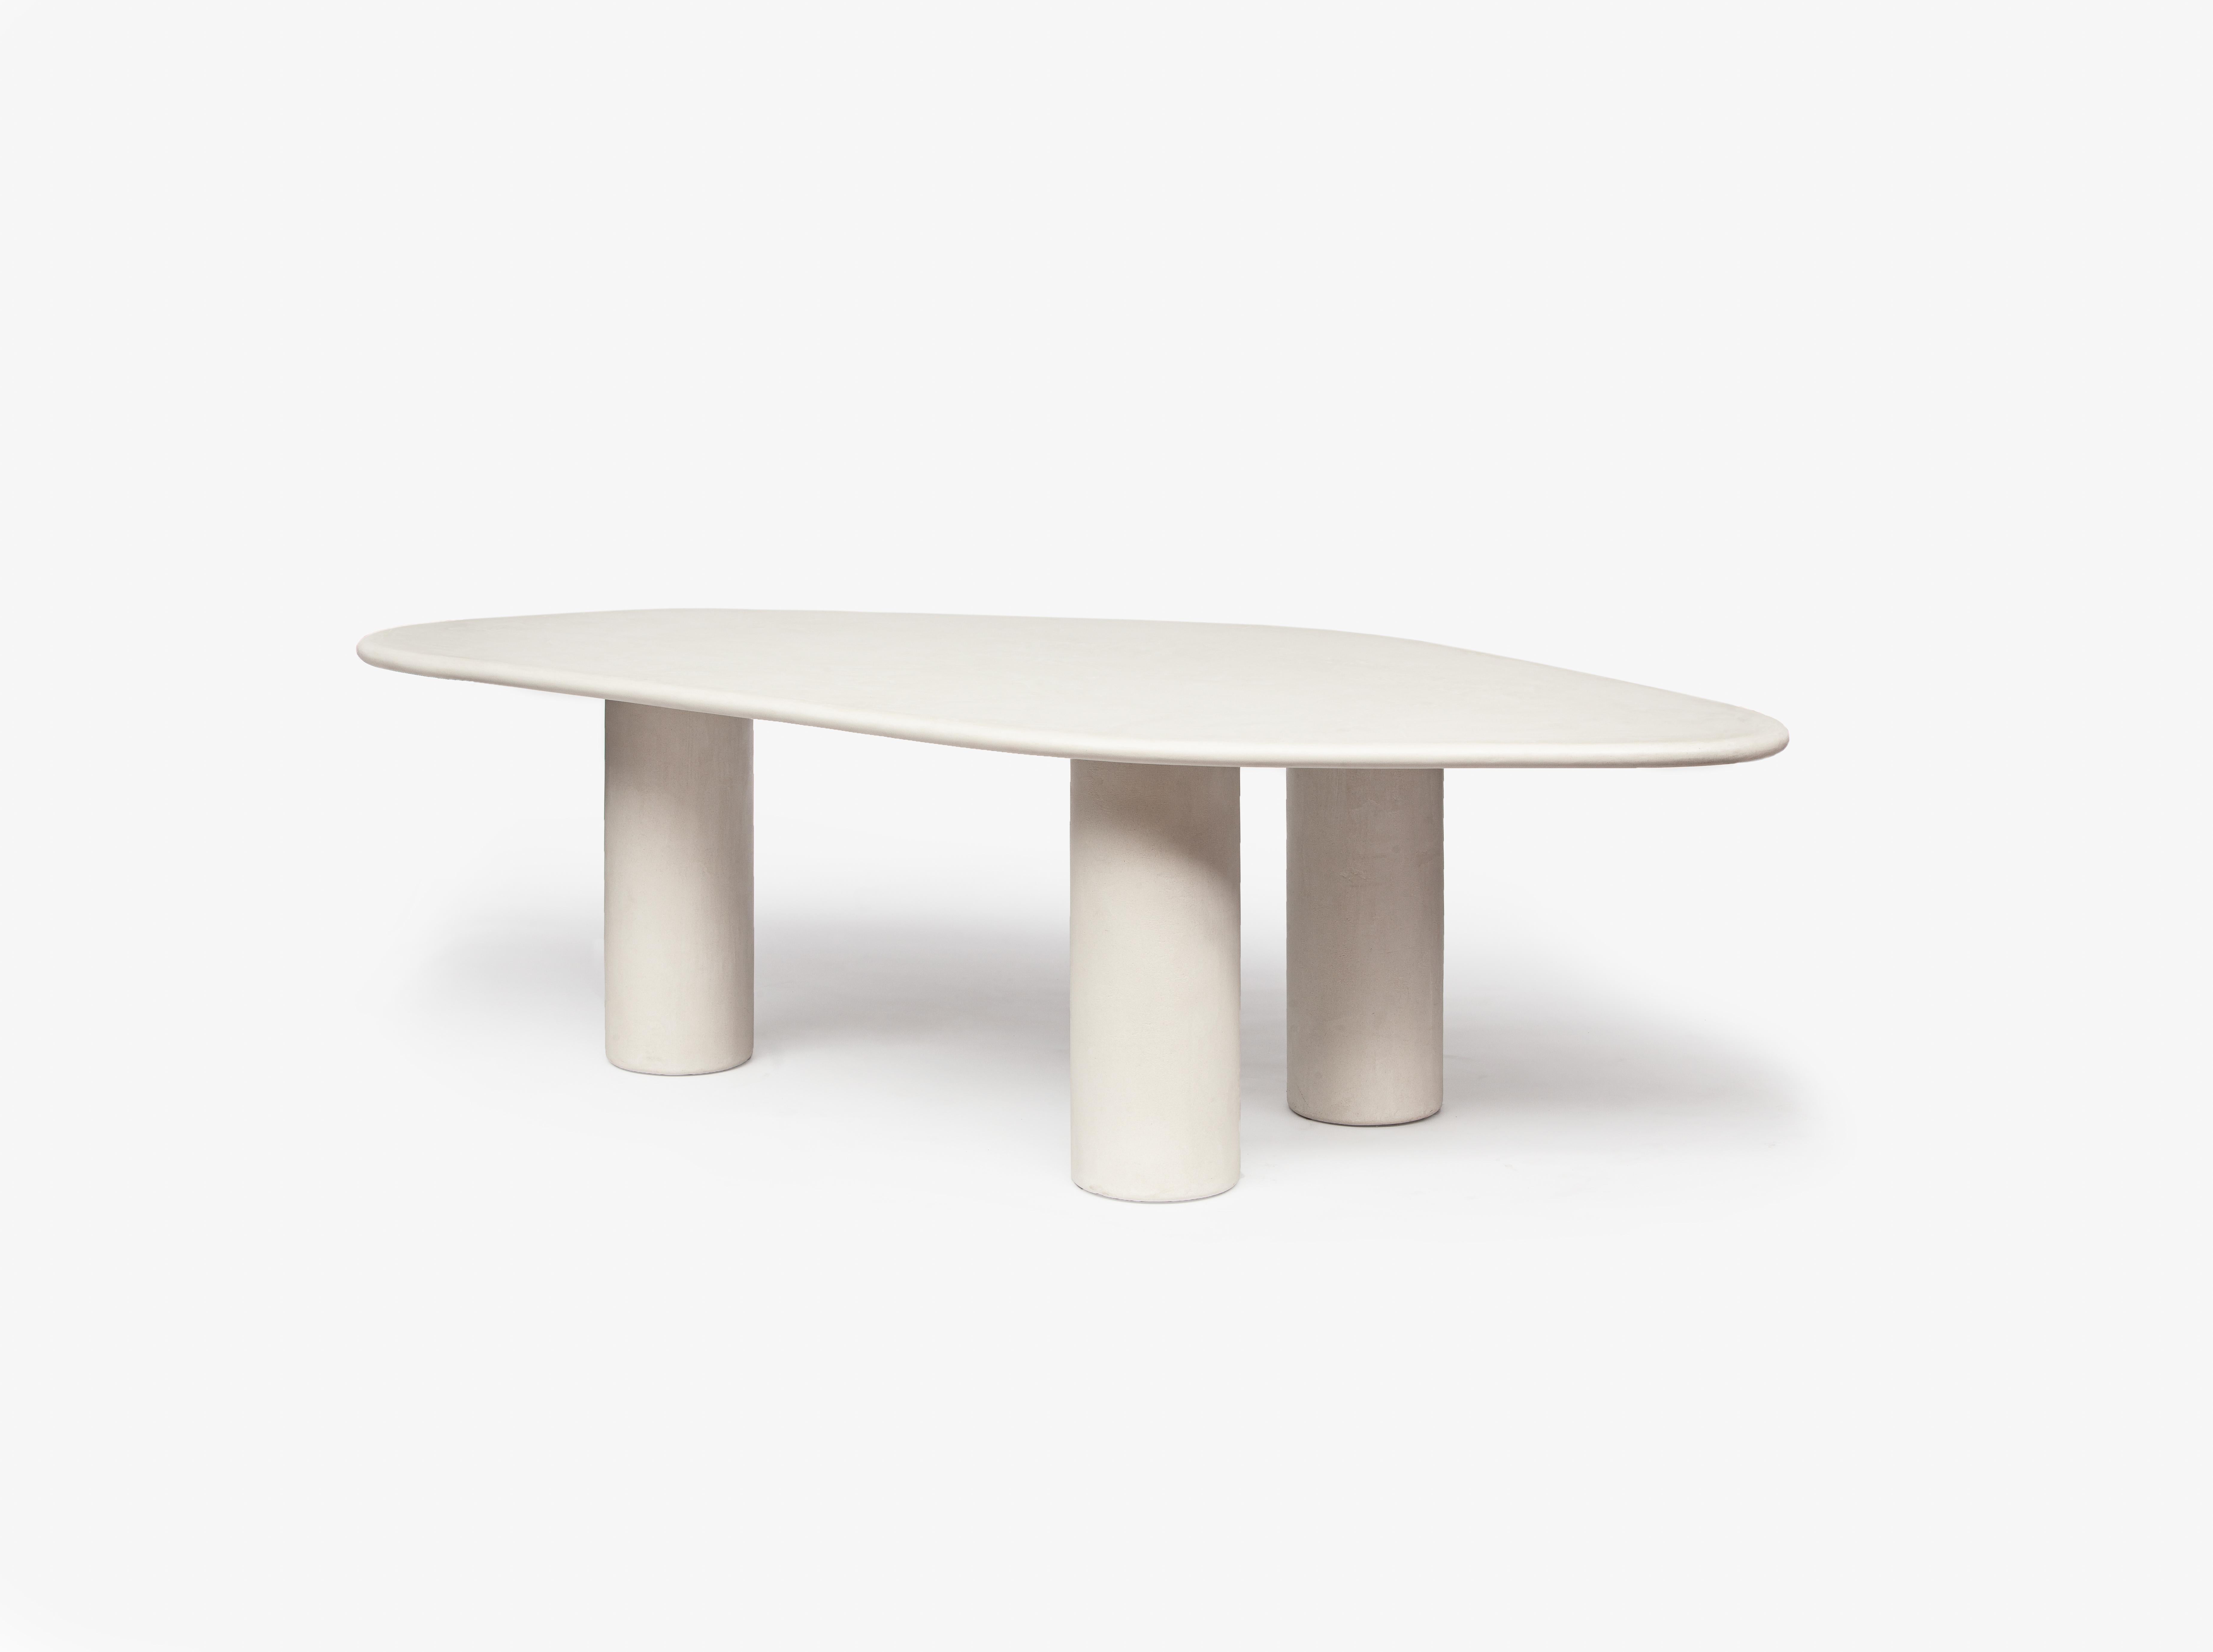 The Vézère collection pays homage to the French river, with its gentle curves and fluid forms. Organic and flowing lines. The shape of the tables was created from pebbles found in the river. 

Starting from a base of plywood, layers of Mortex© are